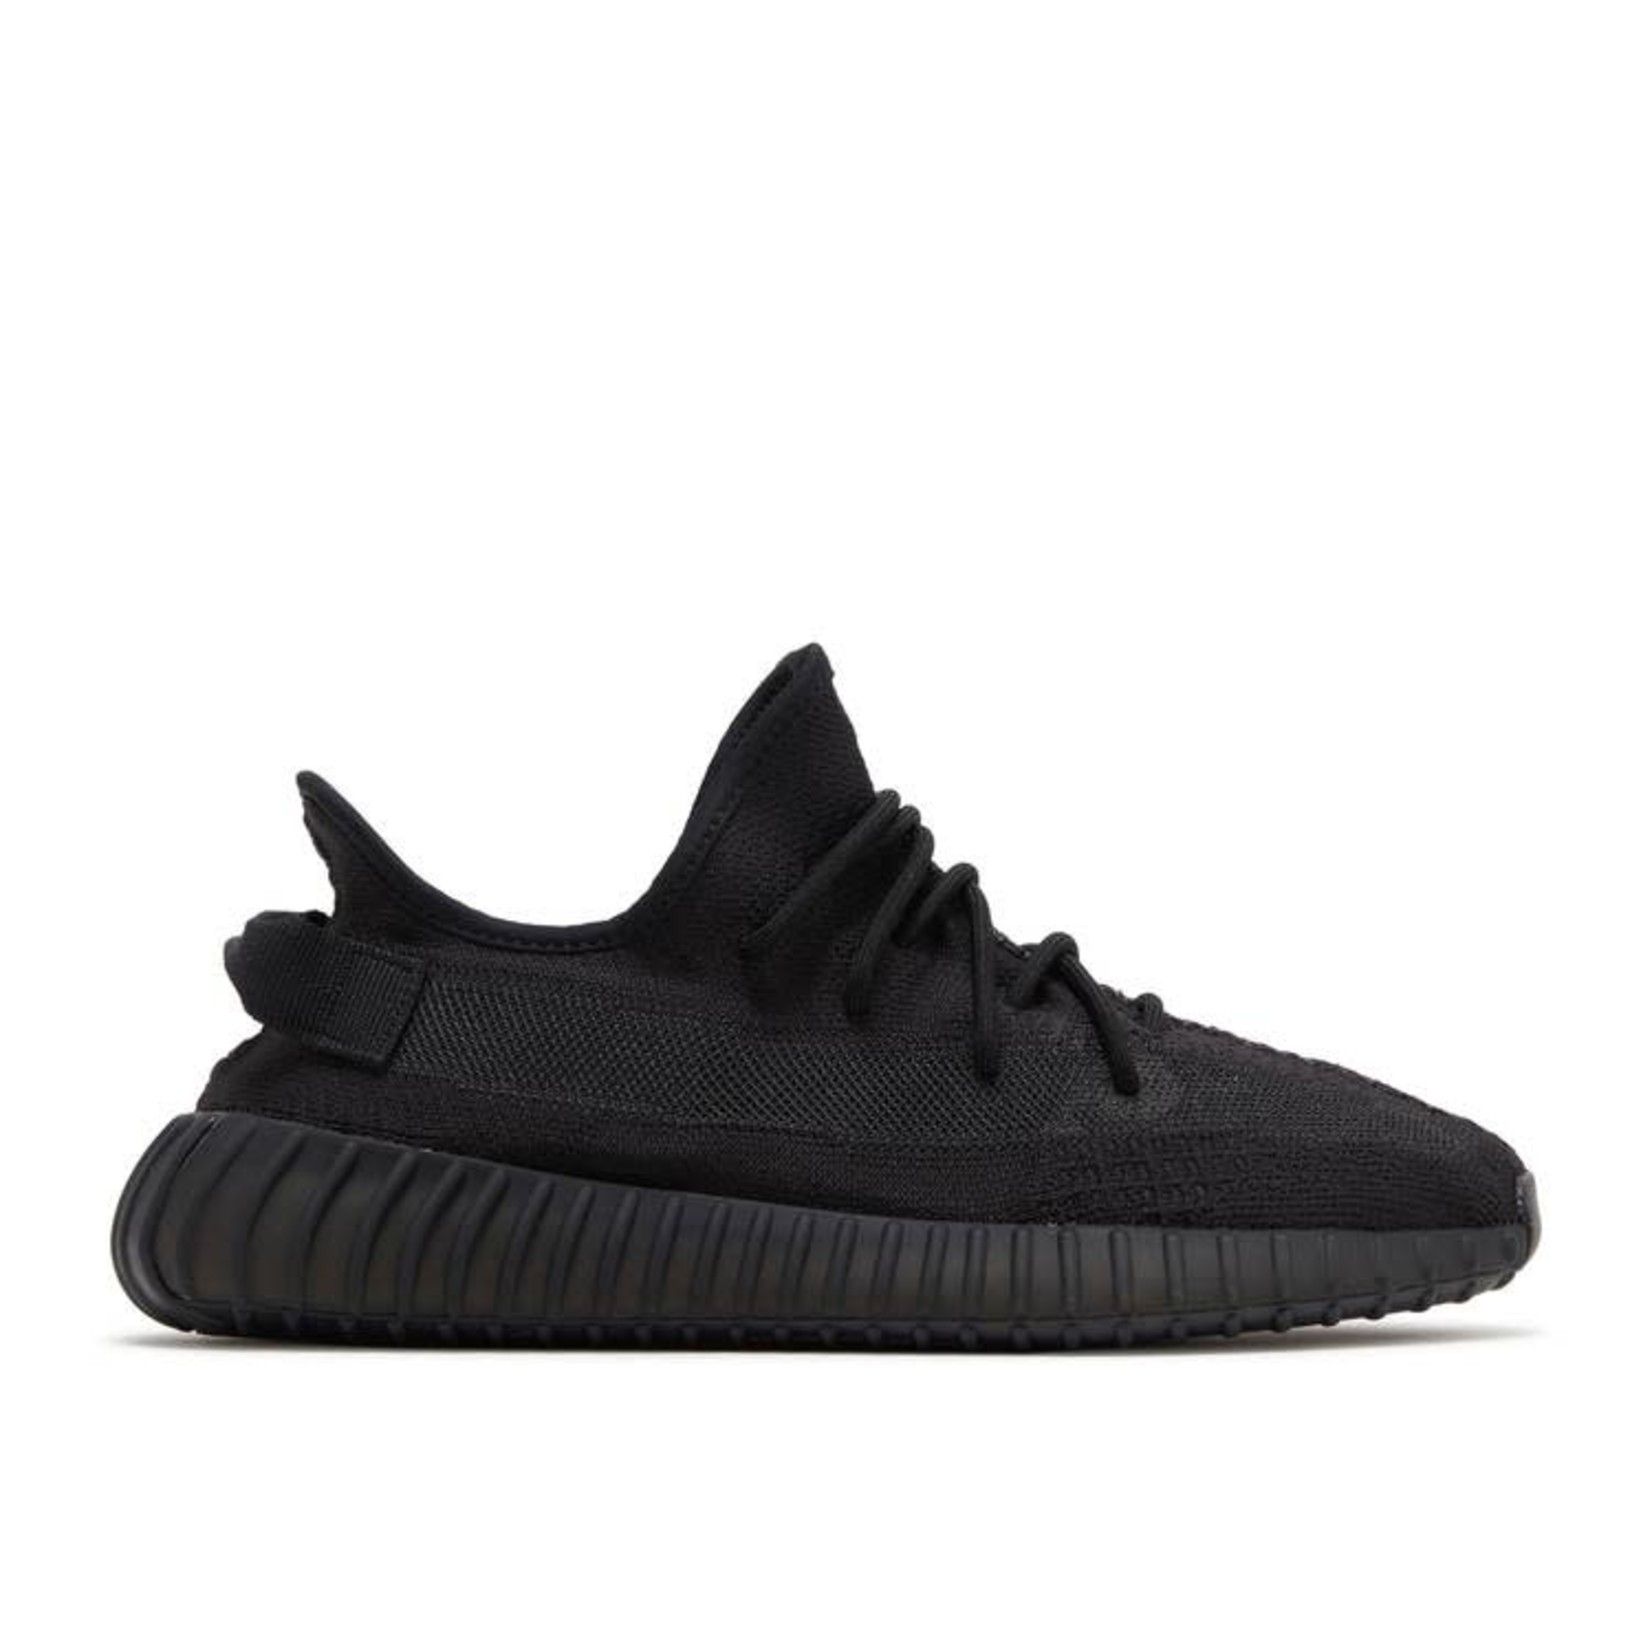 Adidas Yeezy Boost 350 V2 Onyx Size DS BRAND NEW - SoleSeattle